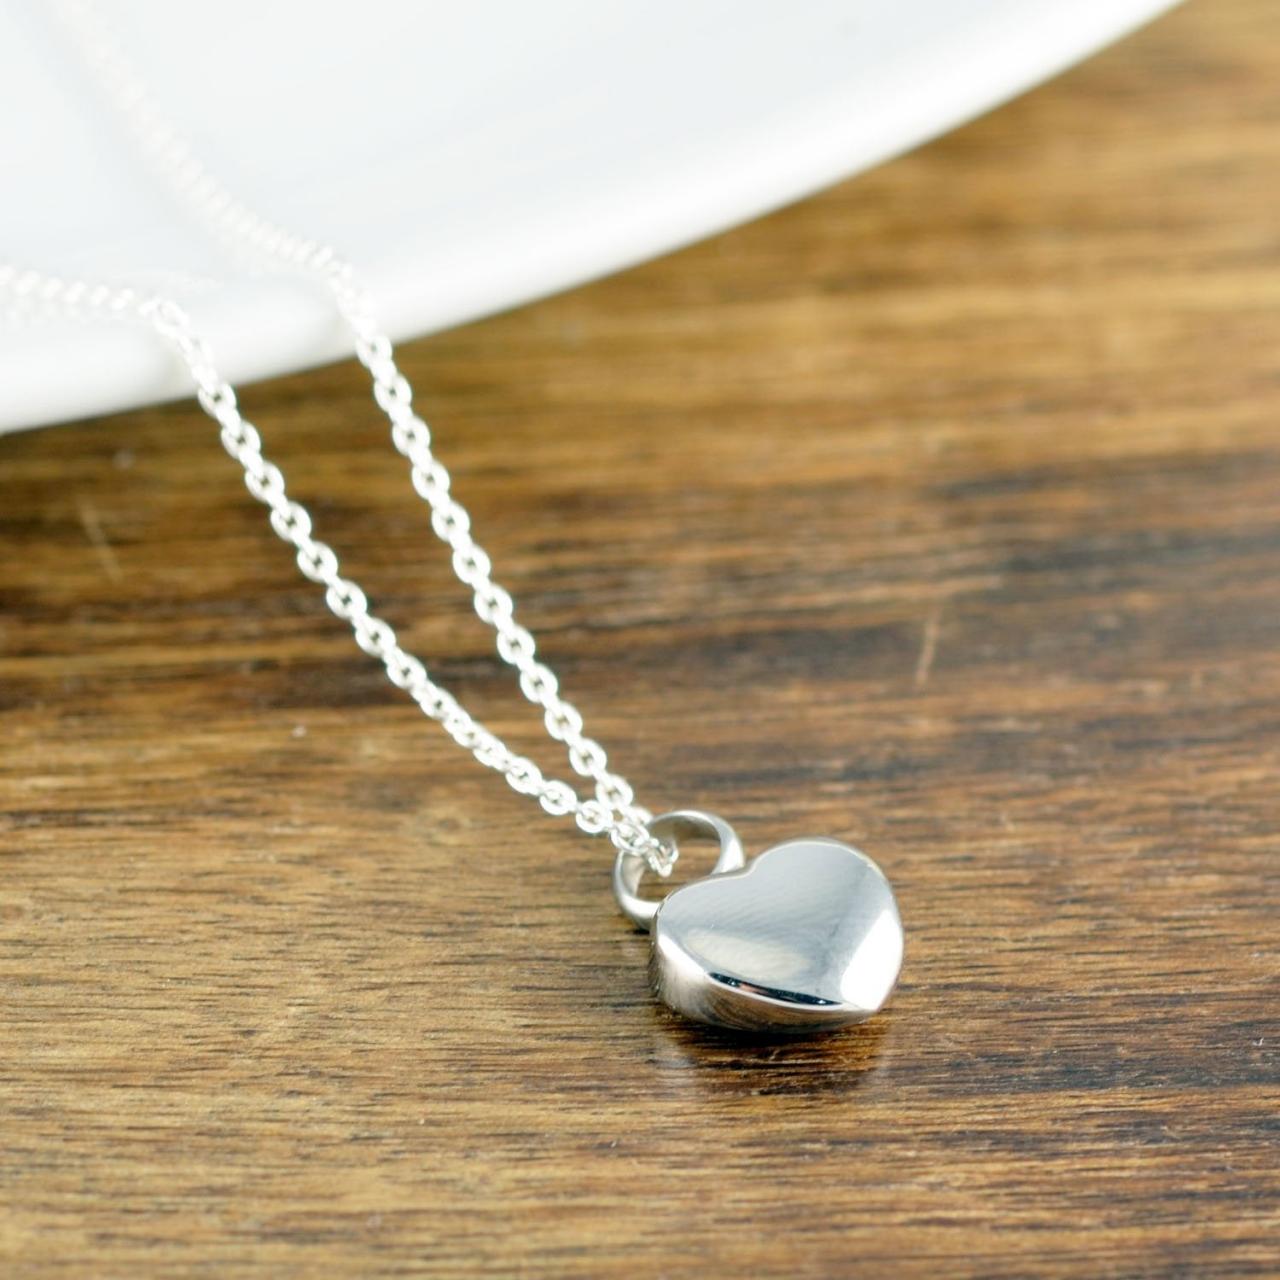 Cremation Jewelry, Ash Jewelry, Heart Cremation Pendant, Urn Necklace For Ashes, Silver Heart Necklace, Cremation Necklace